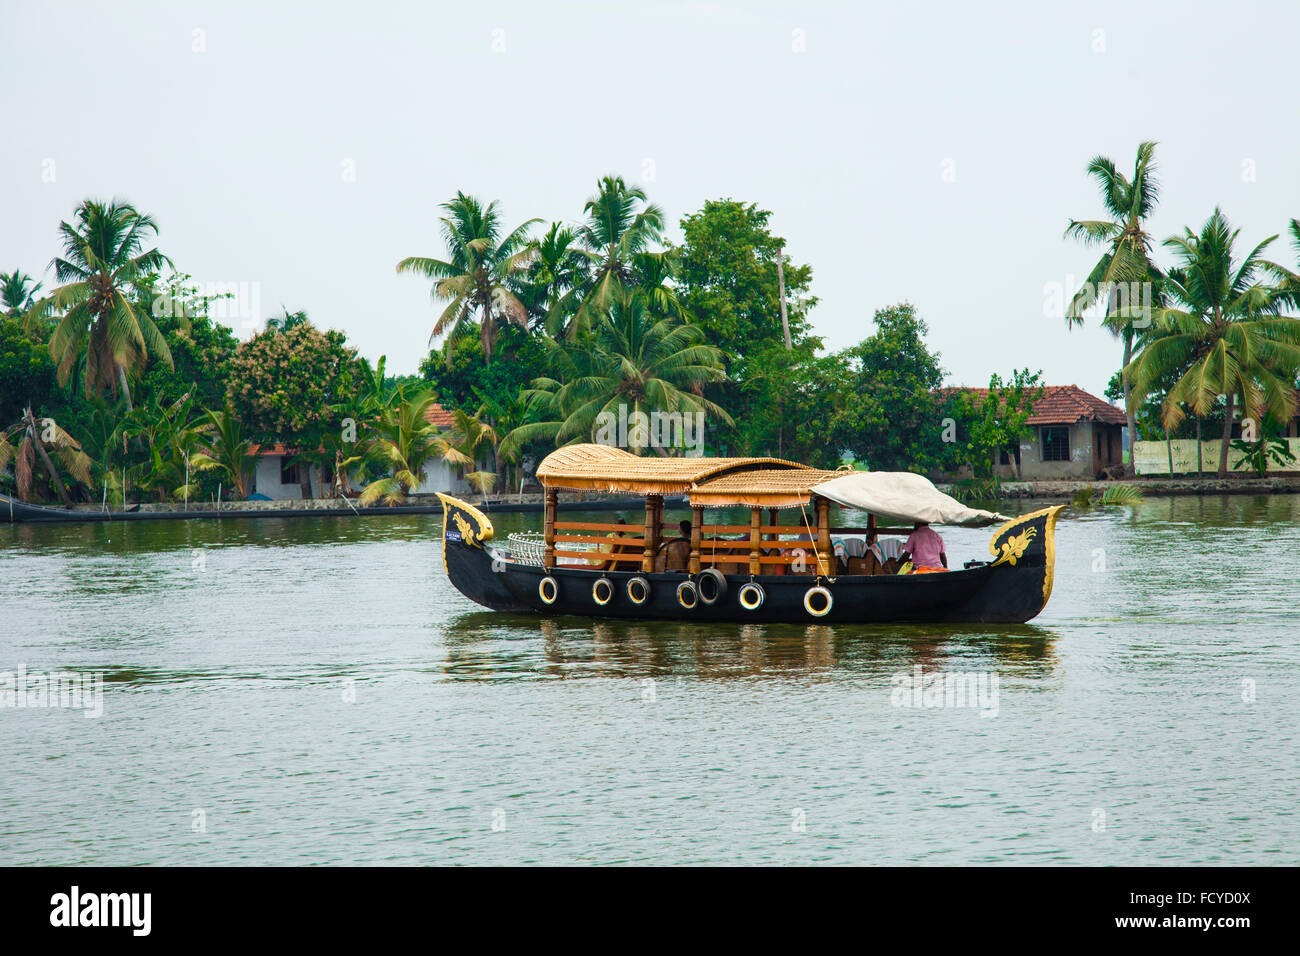 House boat Kerala India, vocation, holidays, Back waters of kerala, Boat house, water transport, recreation, relaxation, Stock Photo